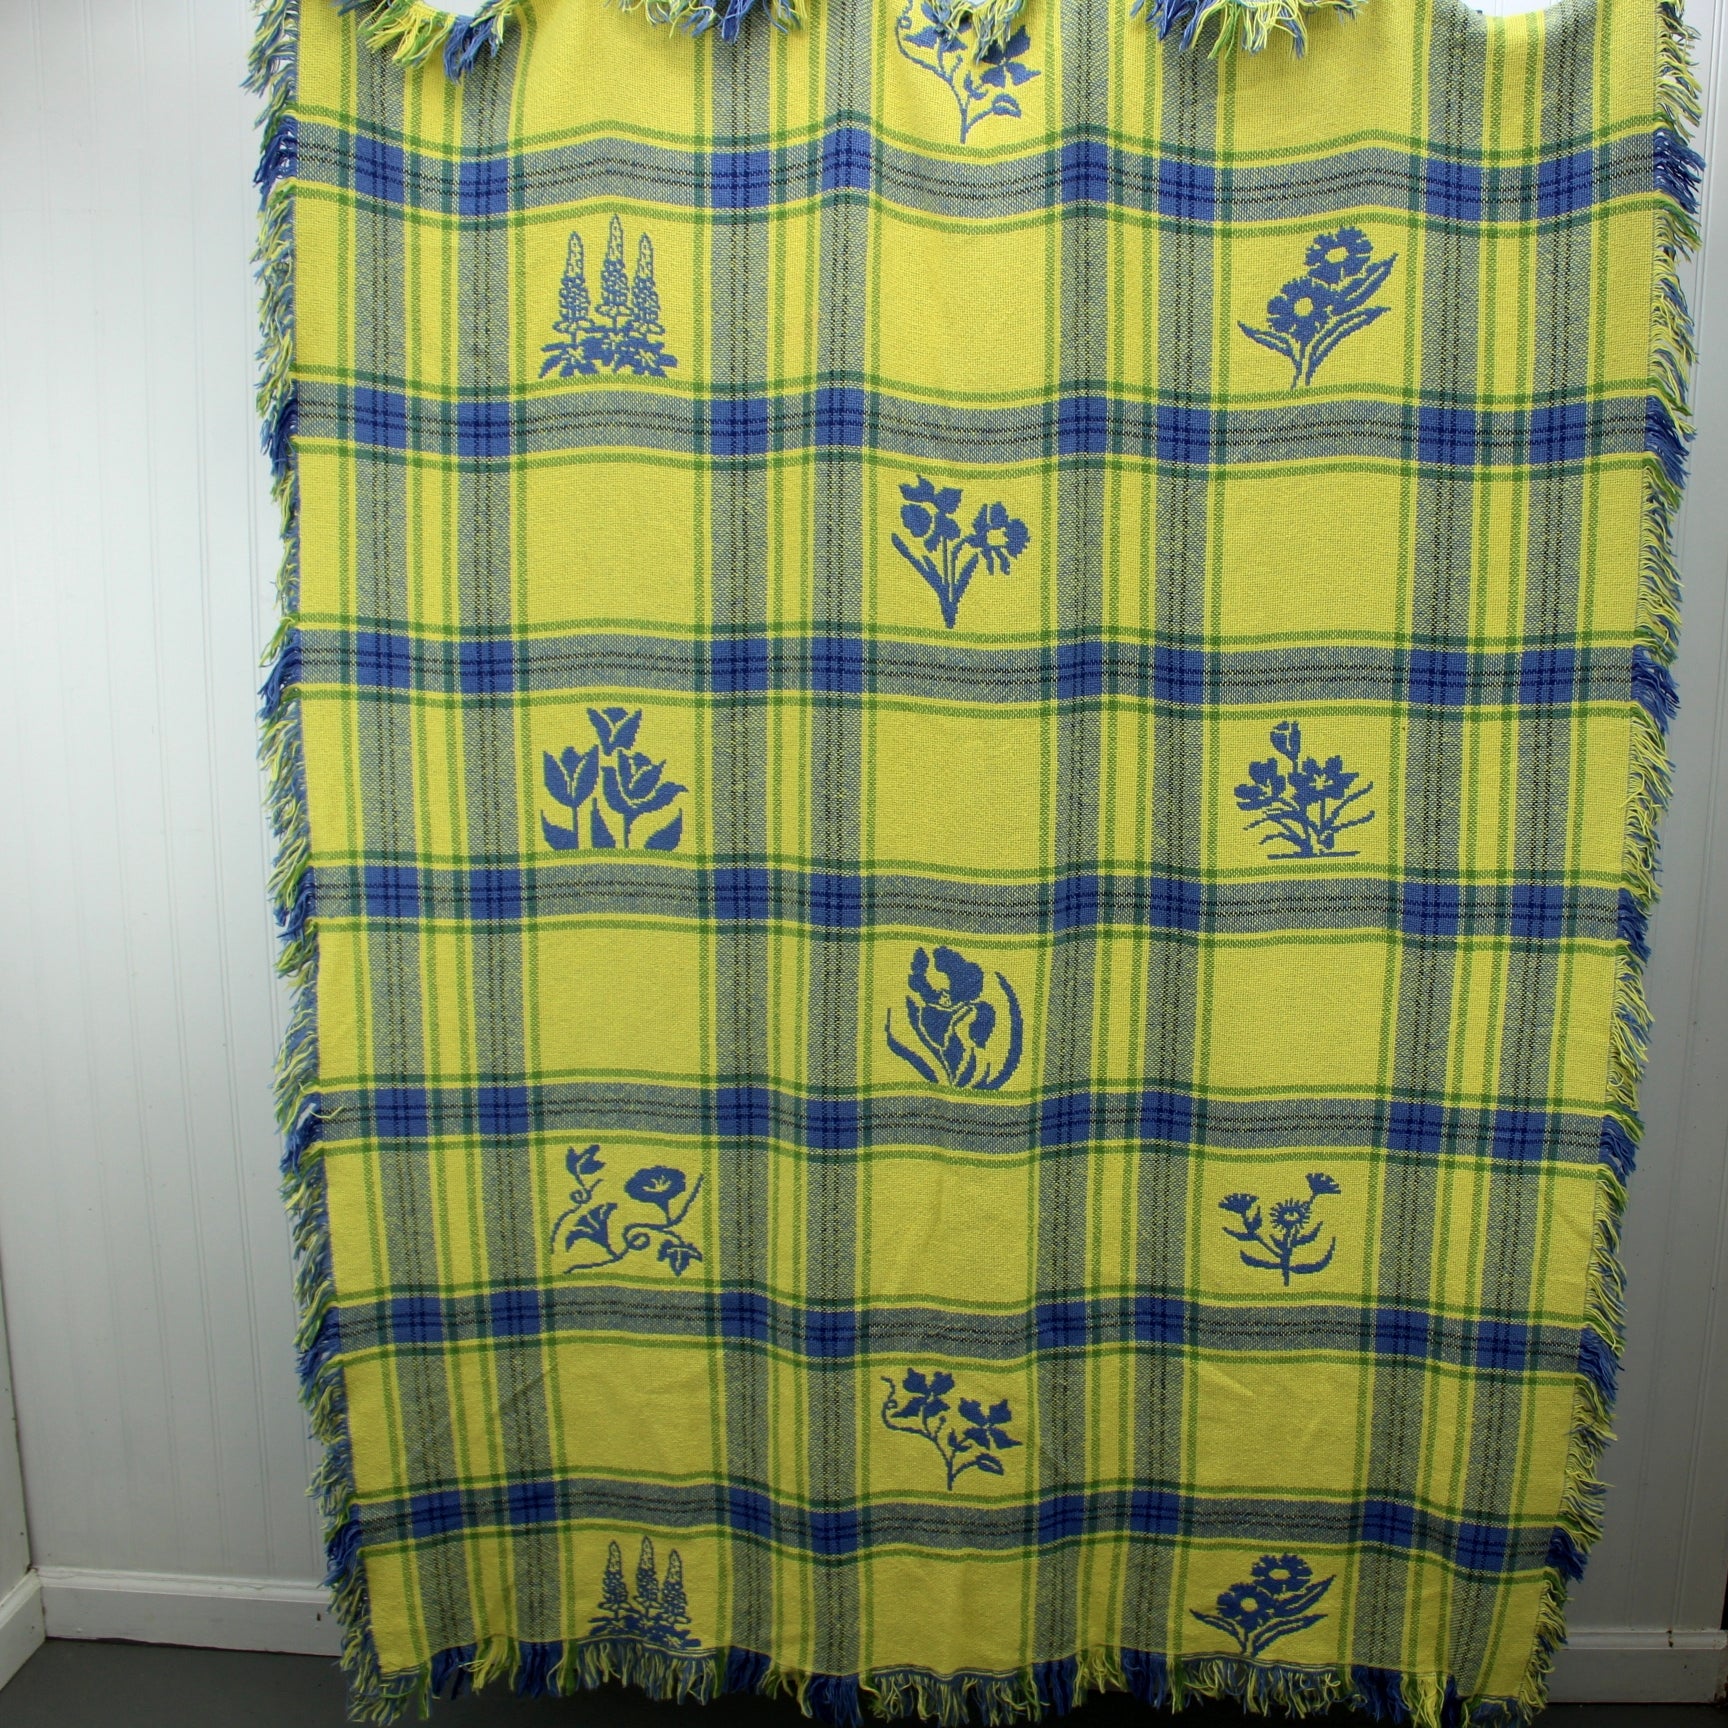 Cotton Throw Blanket Yellow Periwinkle Blue Plaid Squares Wildflowers yellow side full view